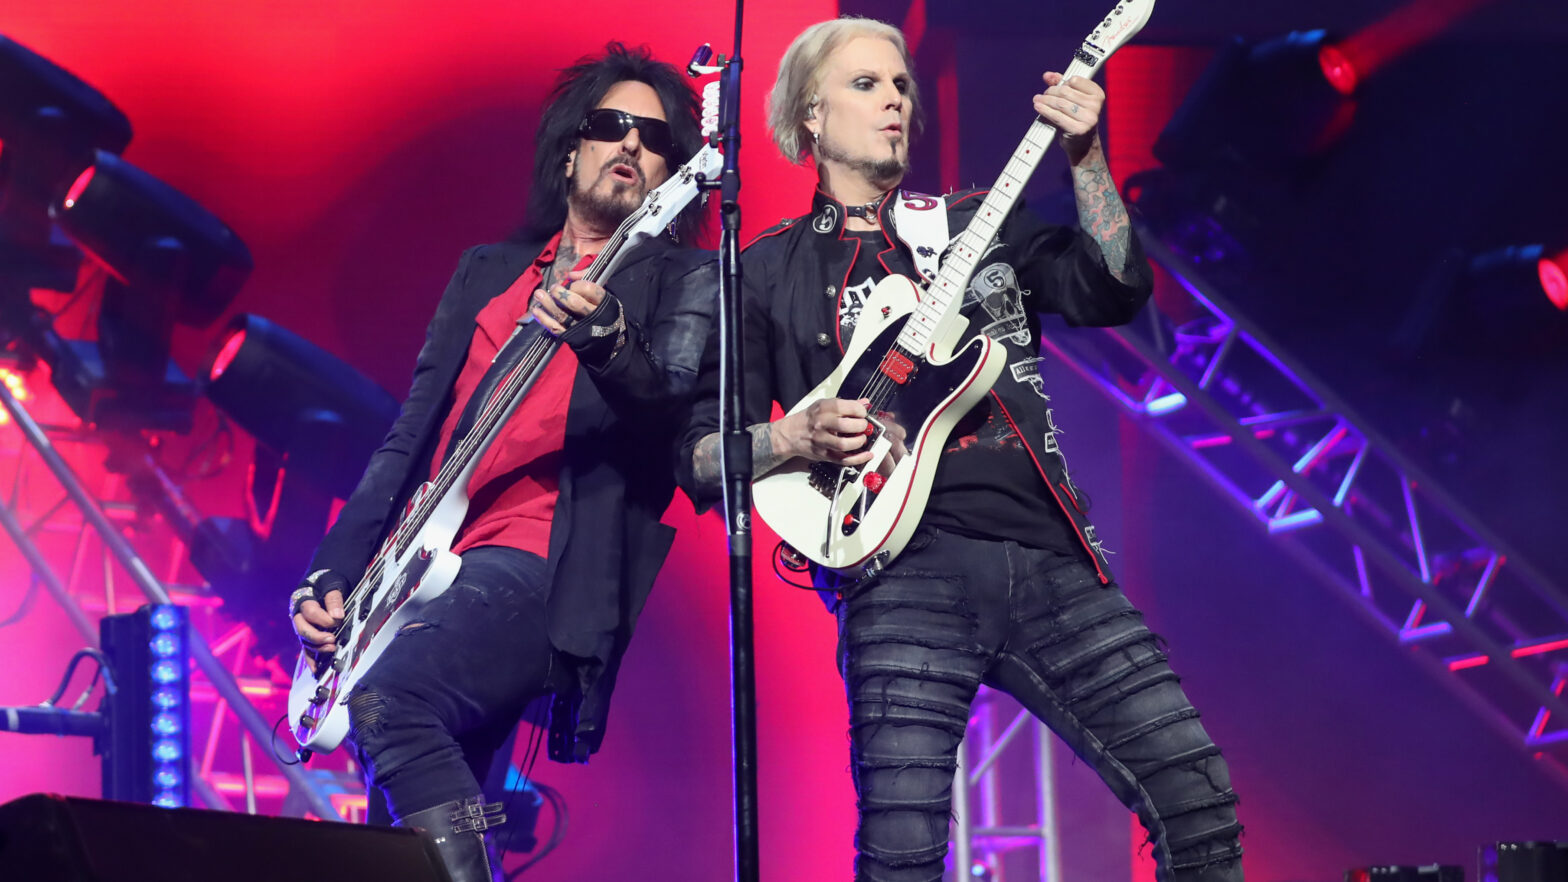 John 5 says Motley Crue’s new music is heavier than anything on Shout At The Devil